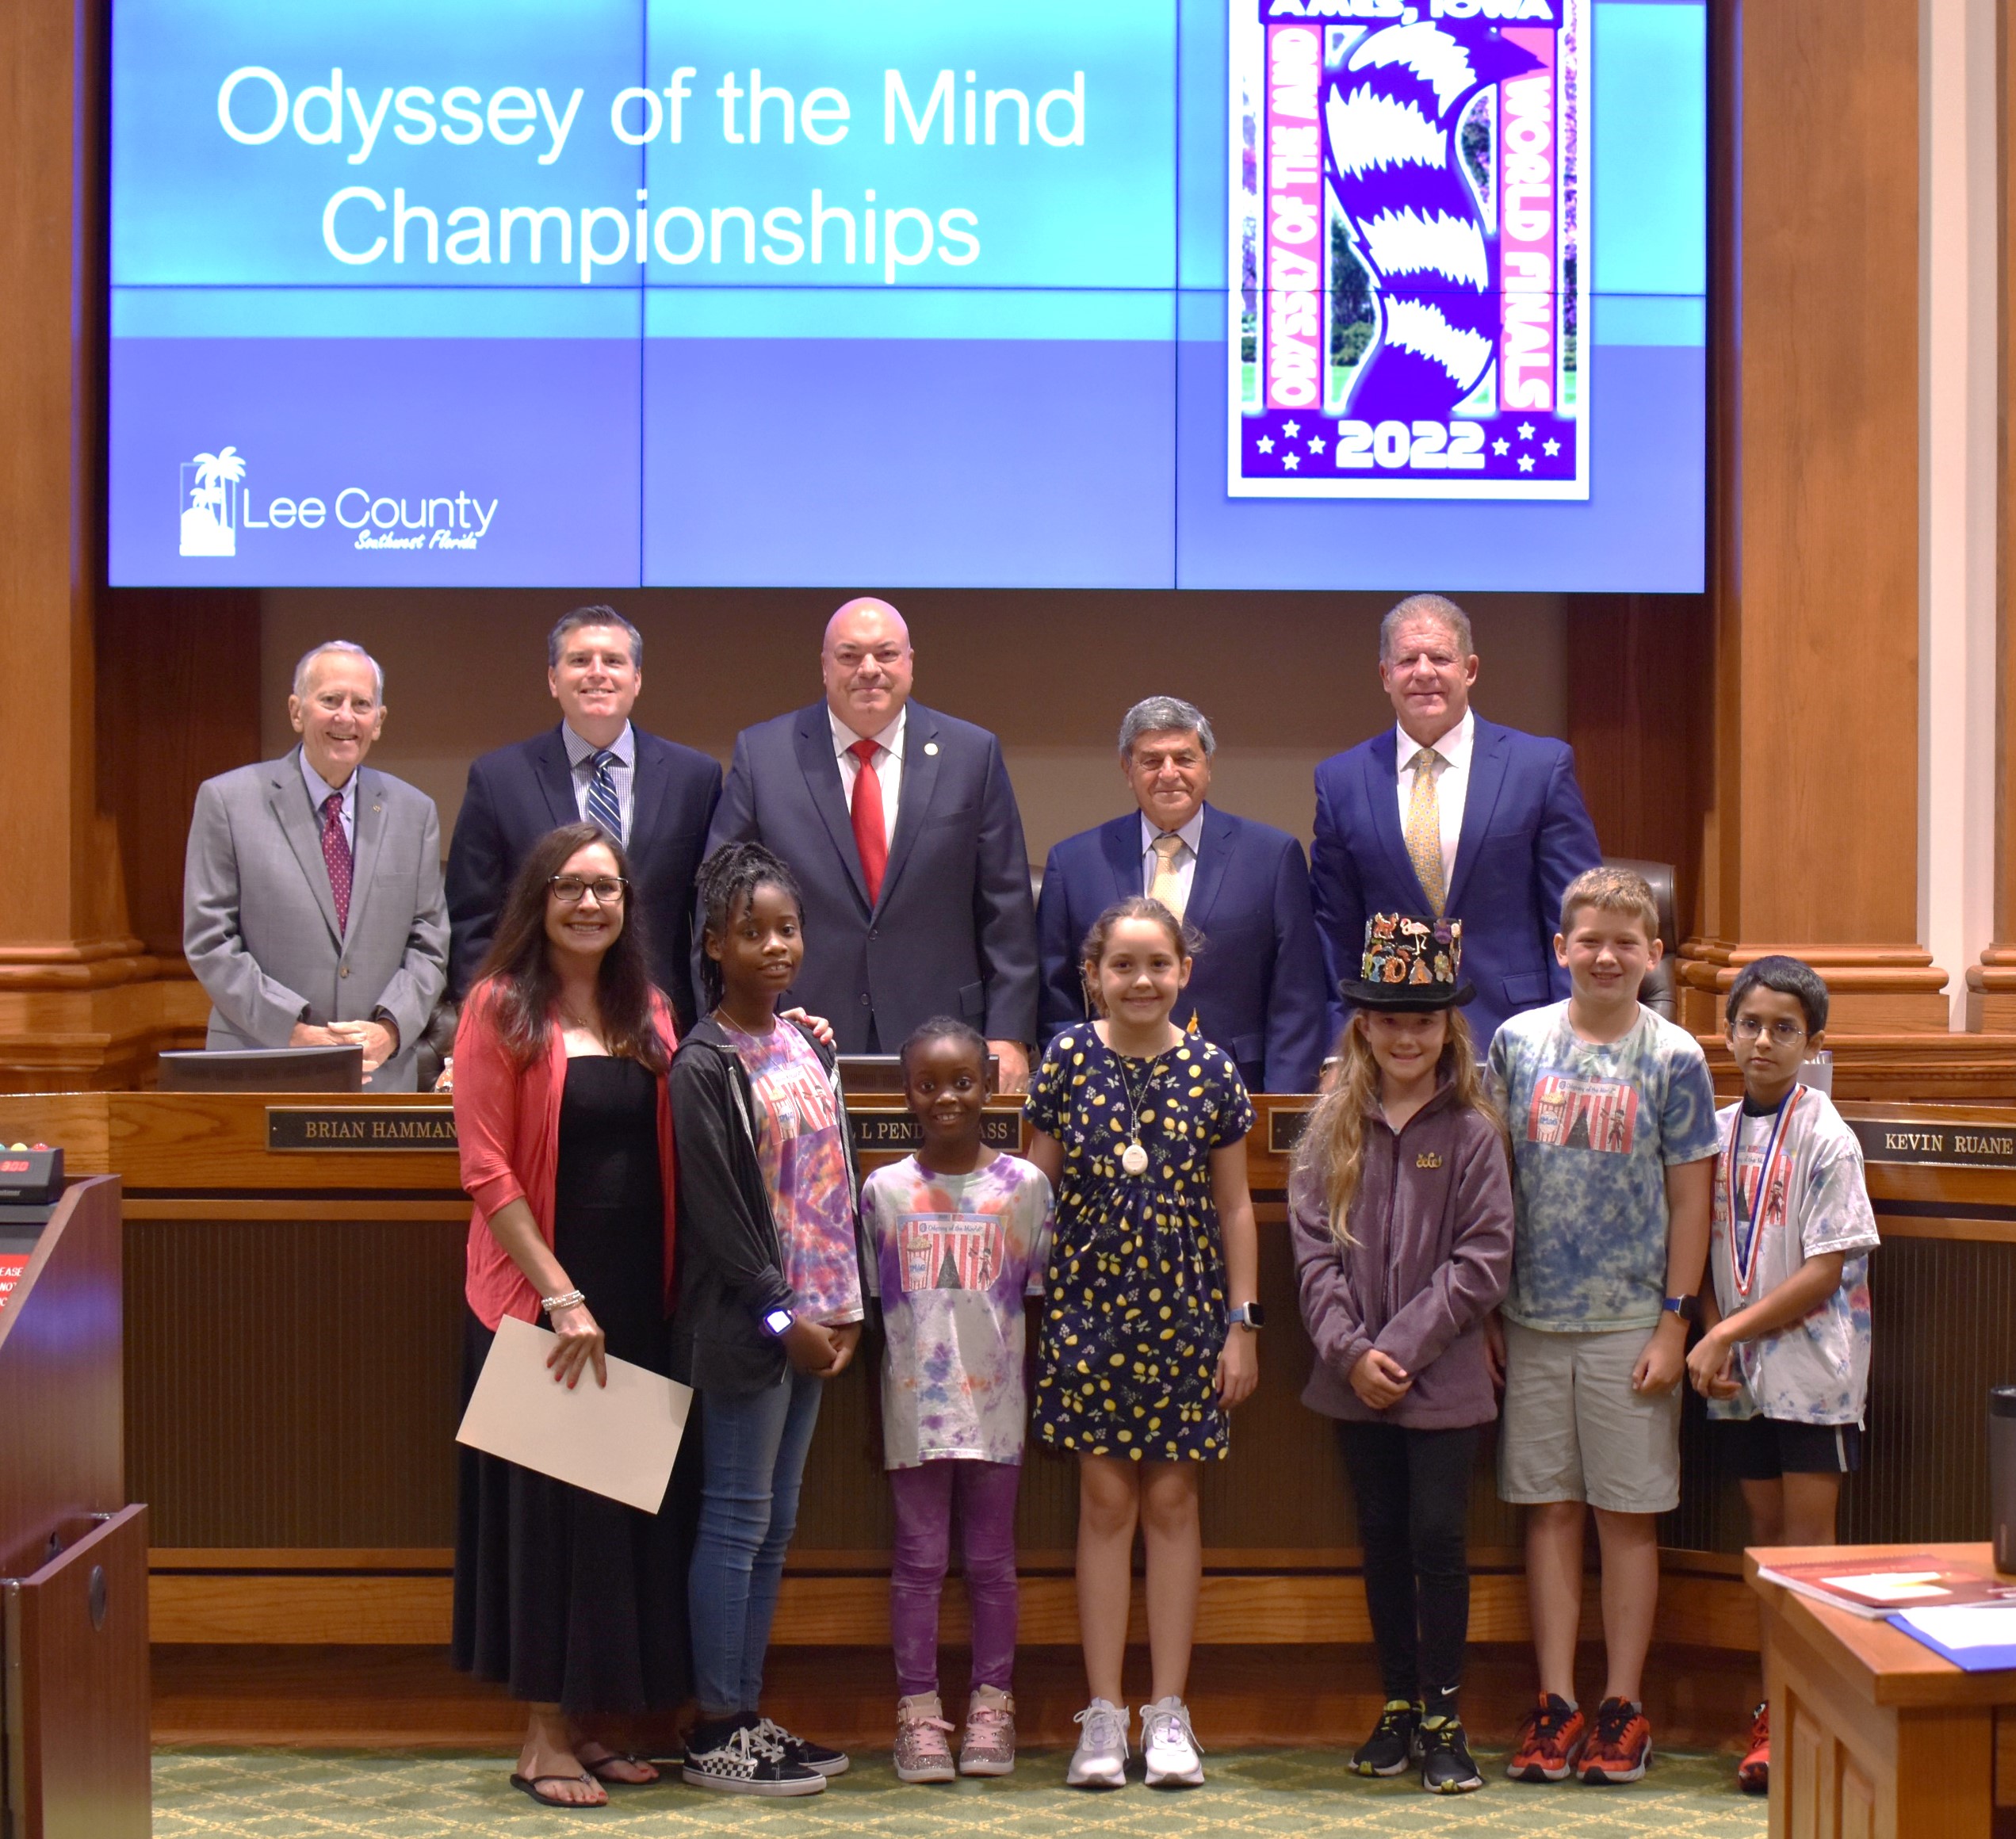 05-17-22 Odyssey of the Mind Champions